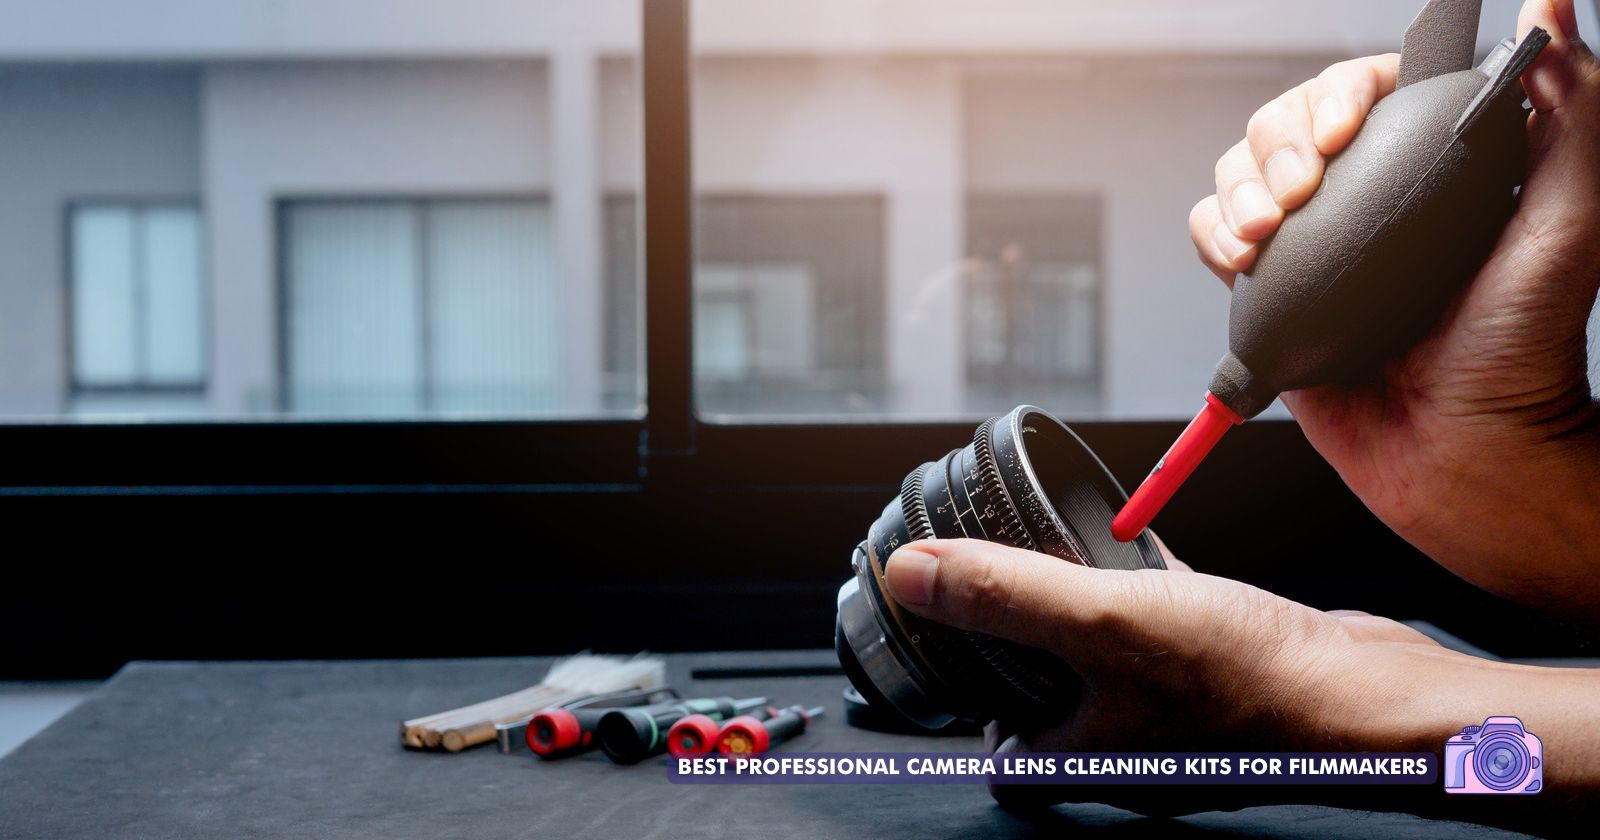 Best Professional Camera Lens Cleaning Kits for Filmmakers